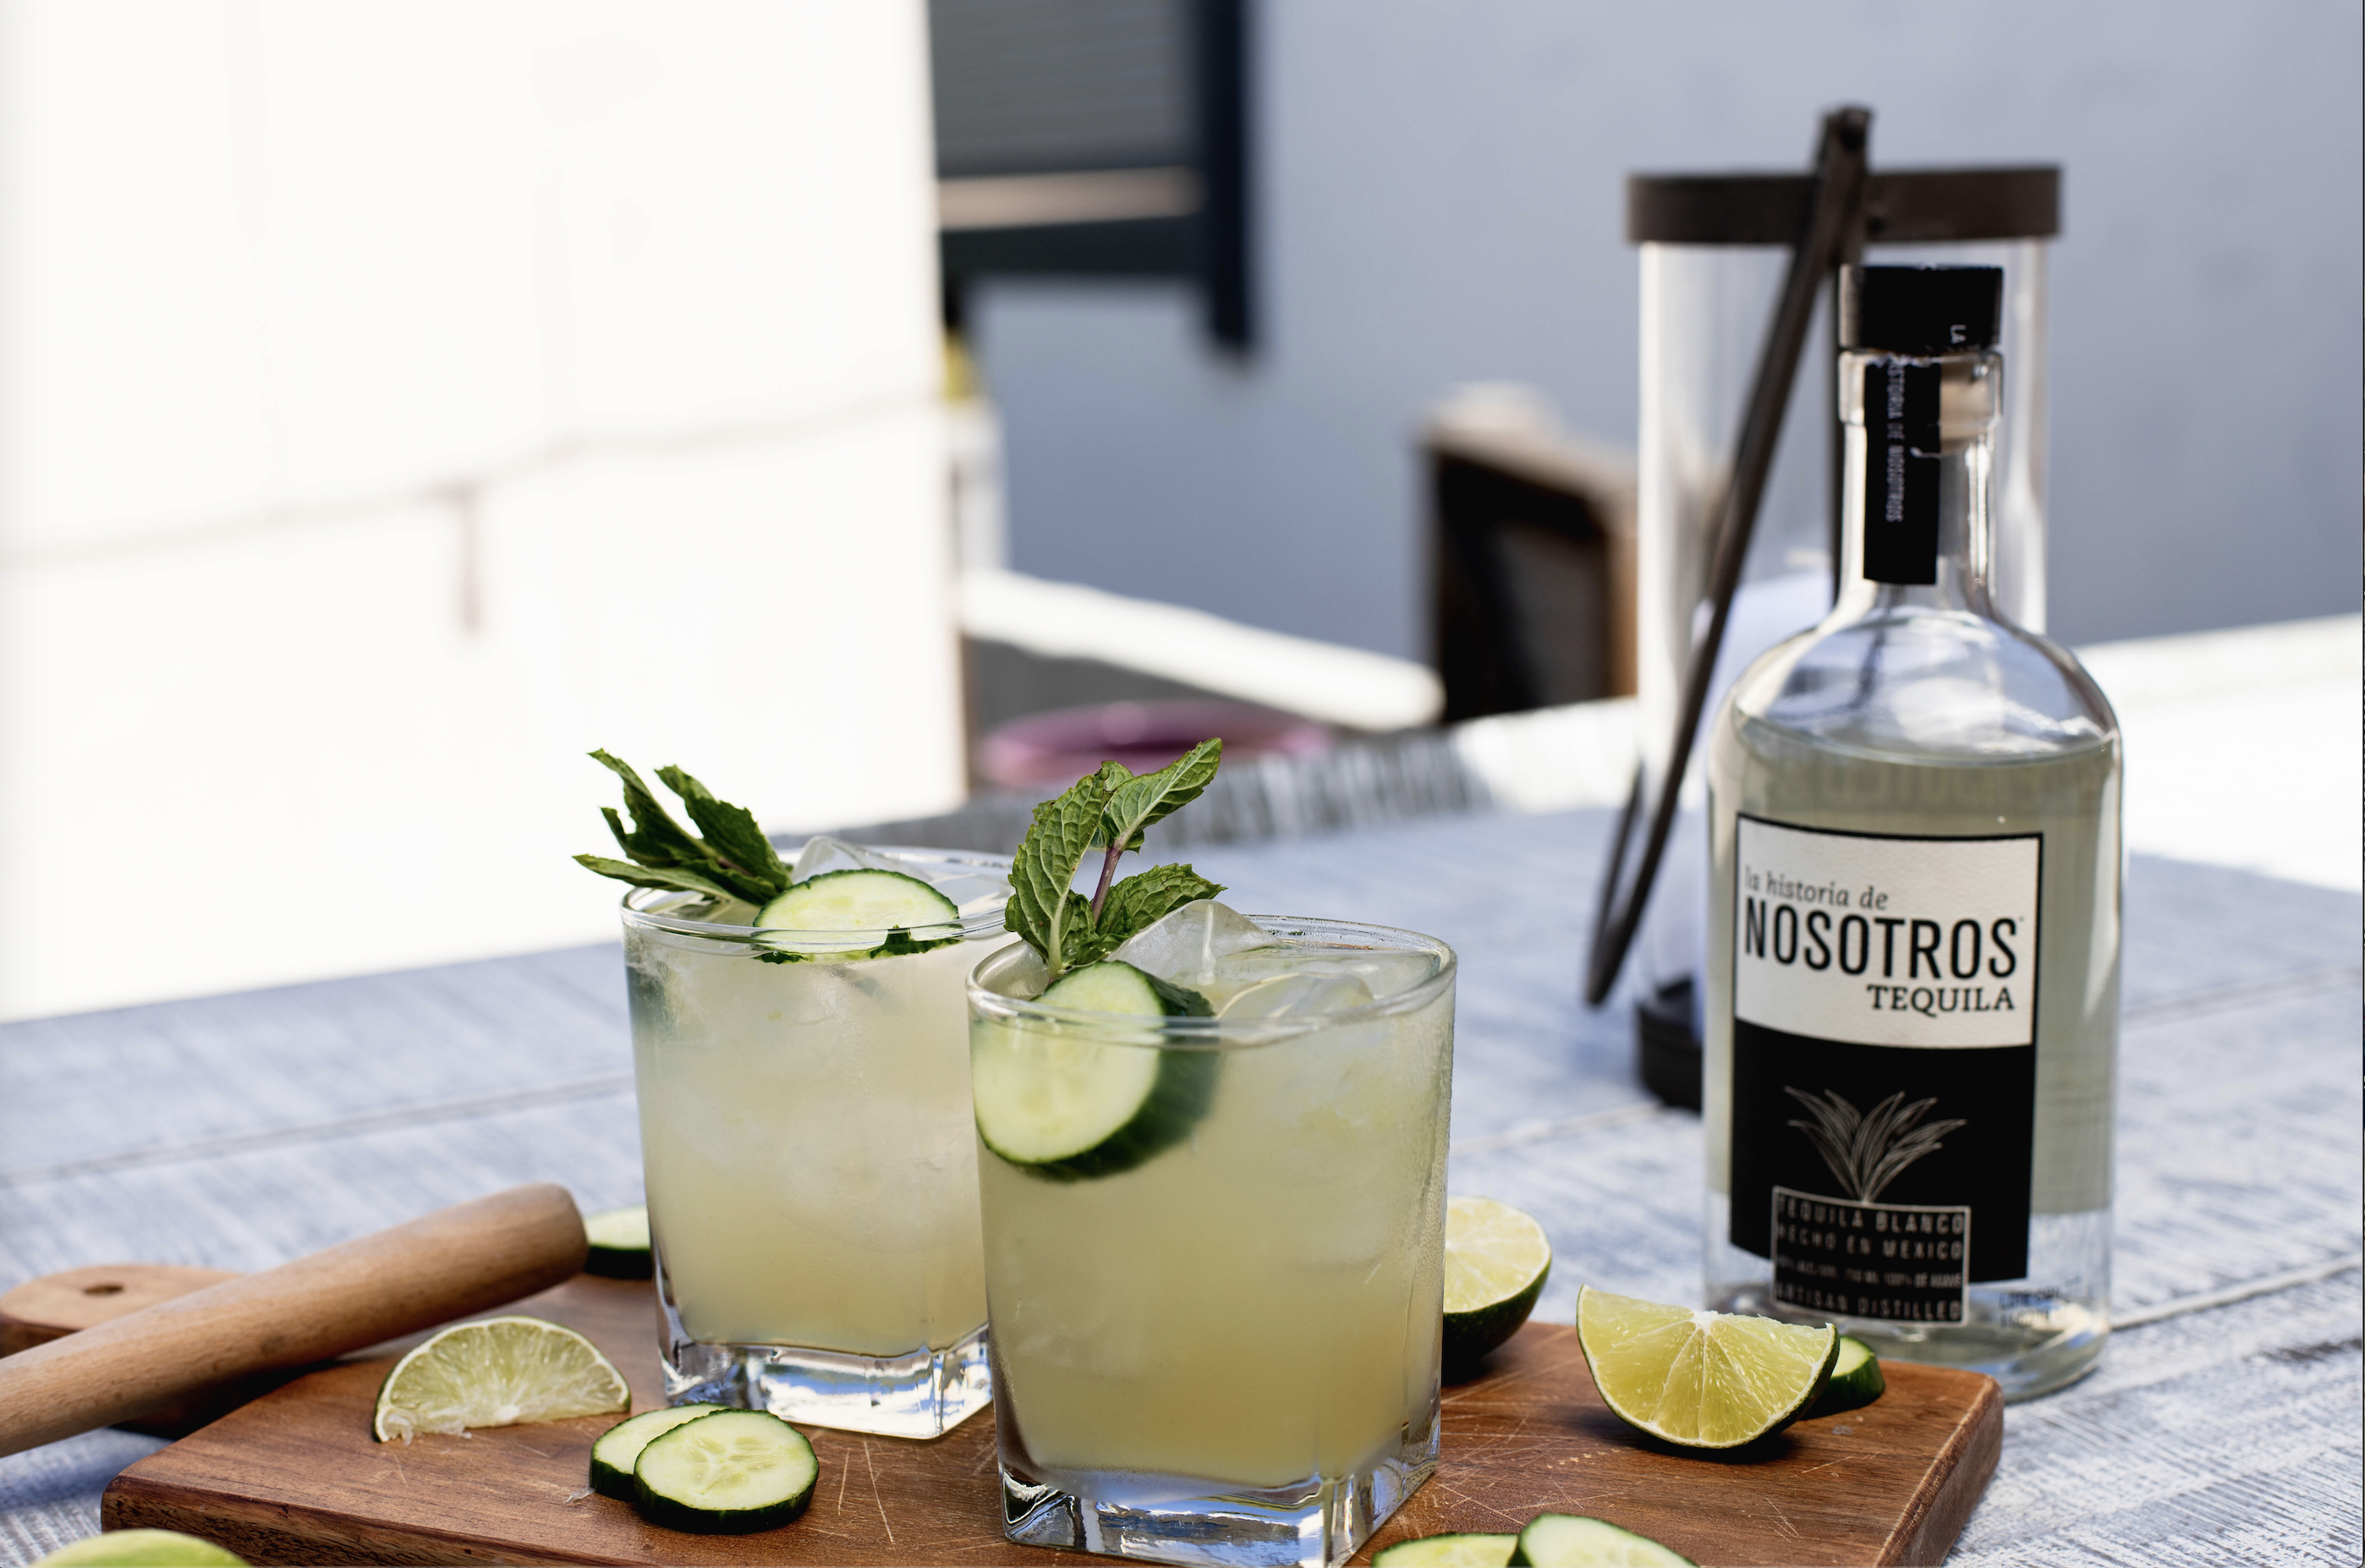 Nosotros Tequila in Hollywood Life – FORTE MARE.